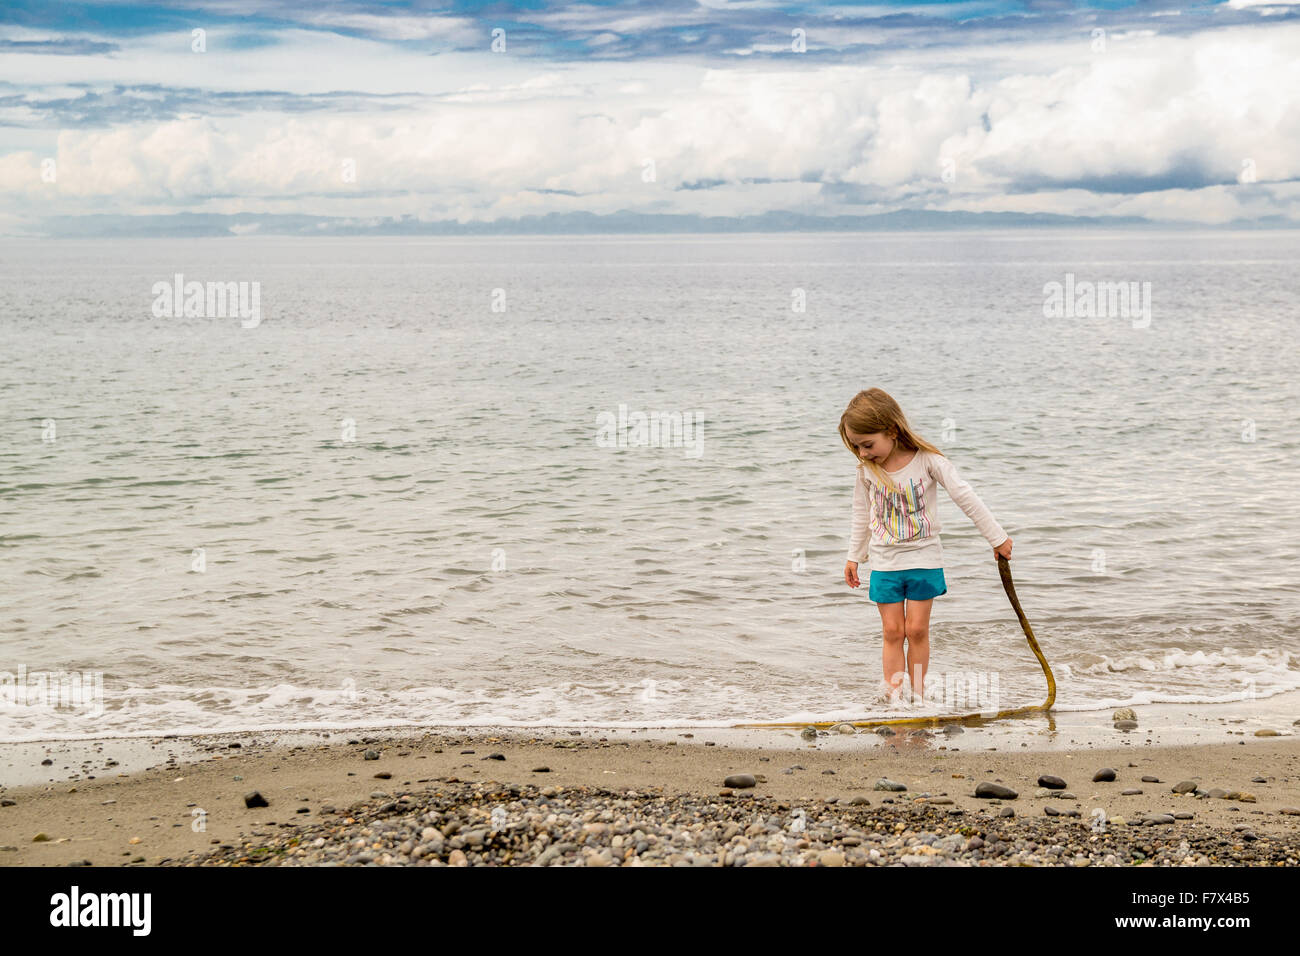 Girl standing on beach holding a stick Stock Photo